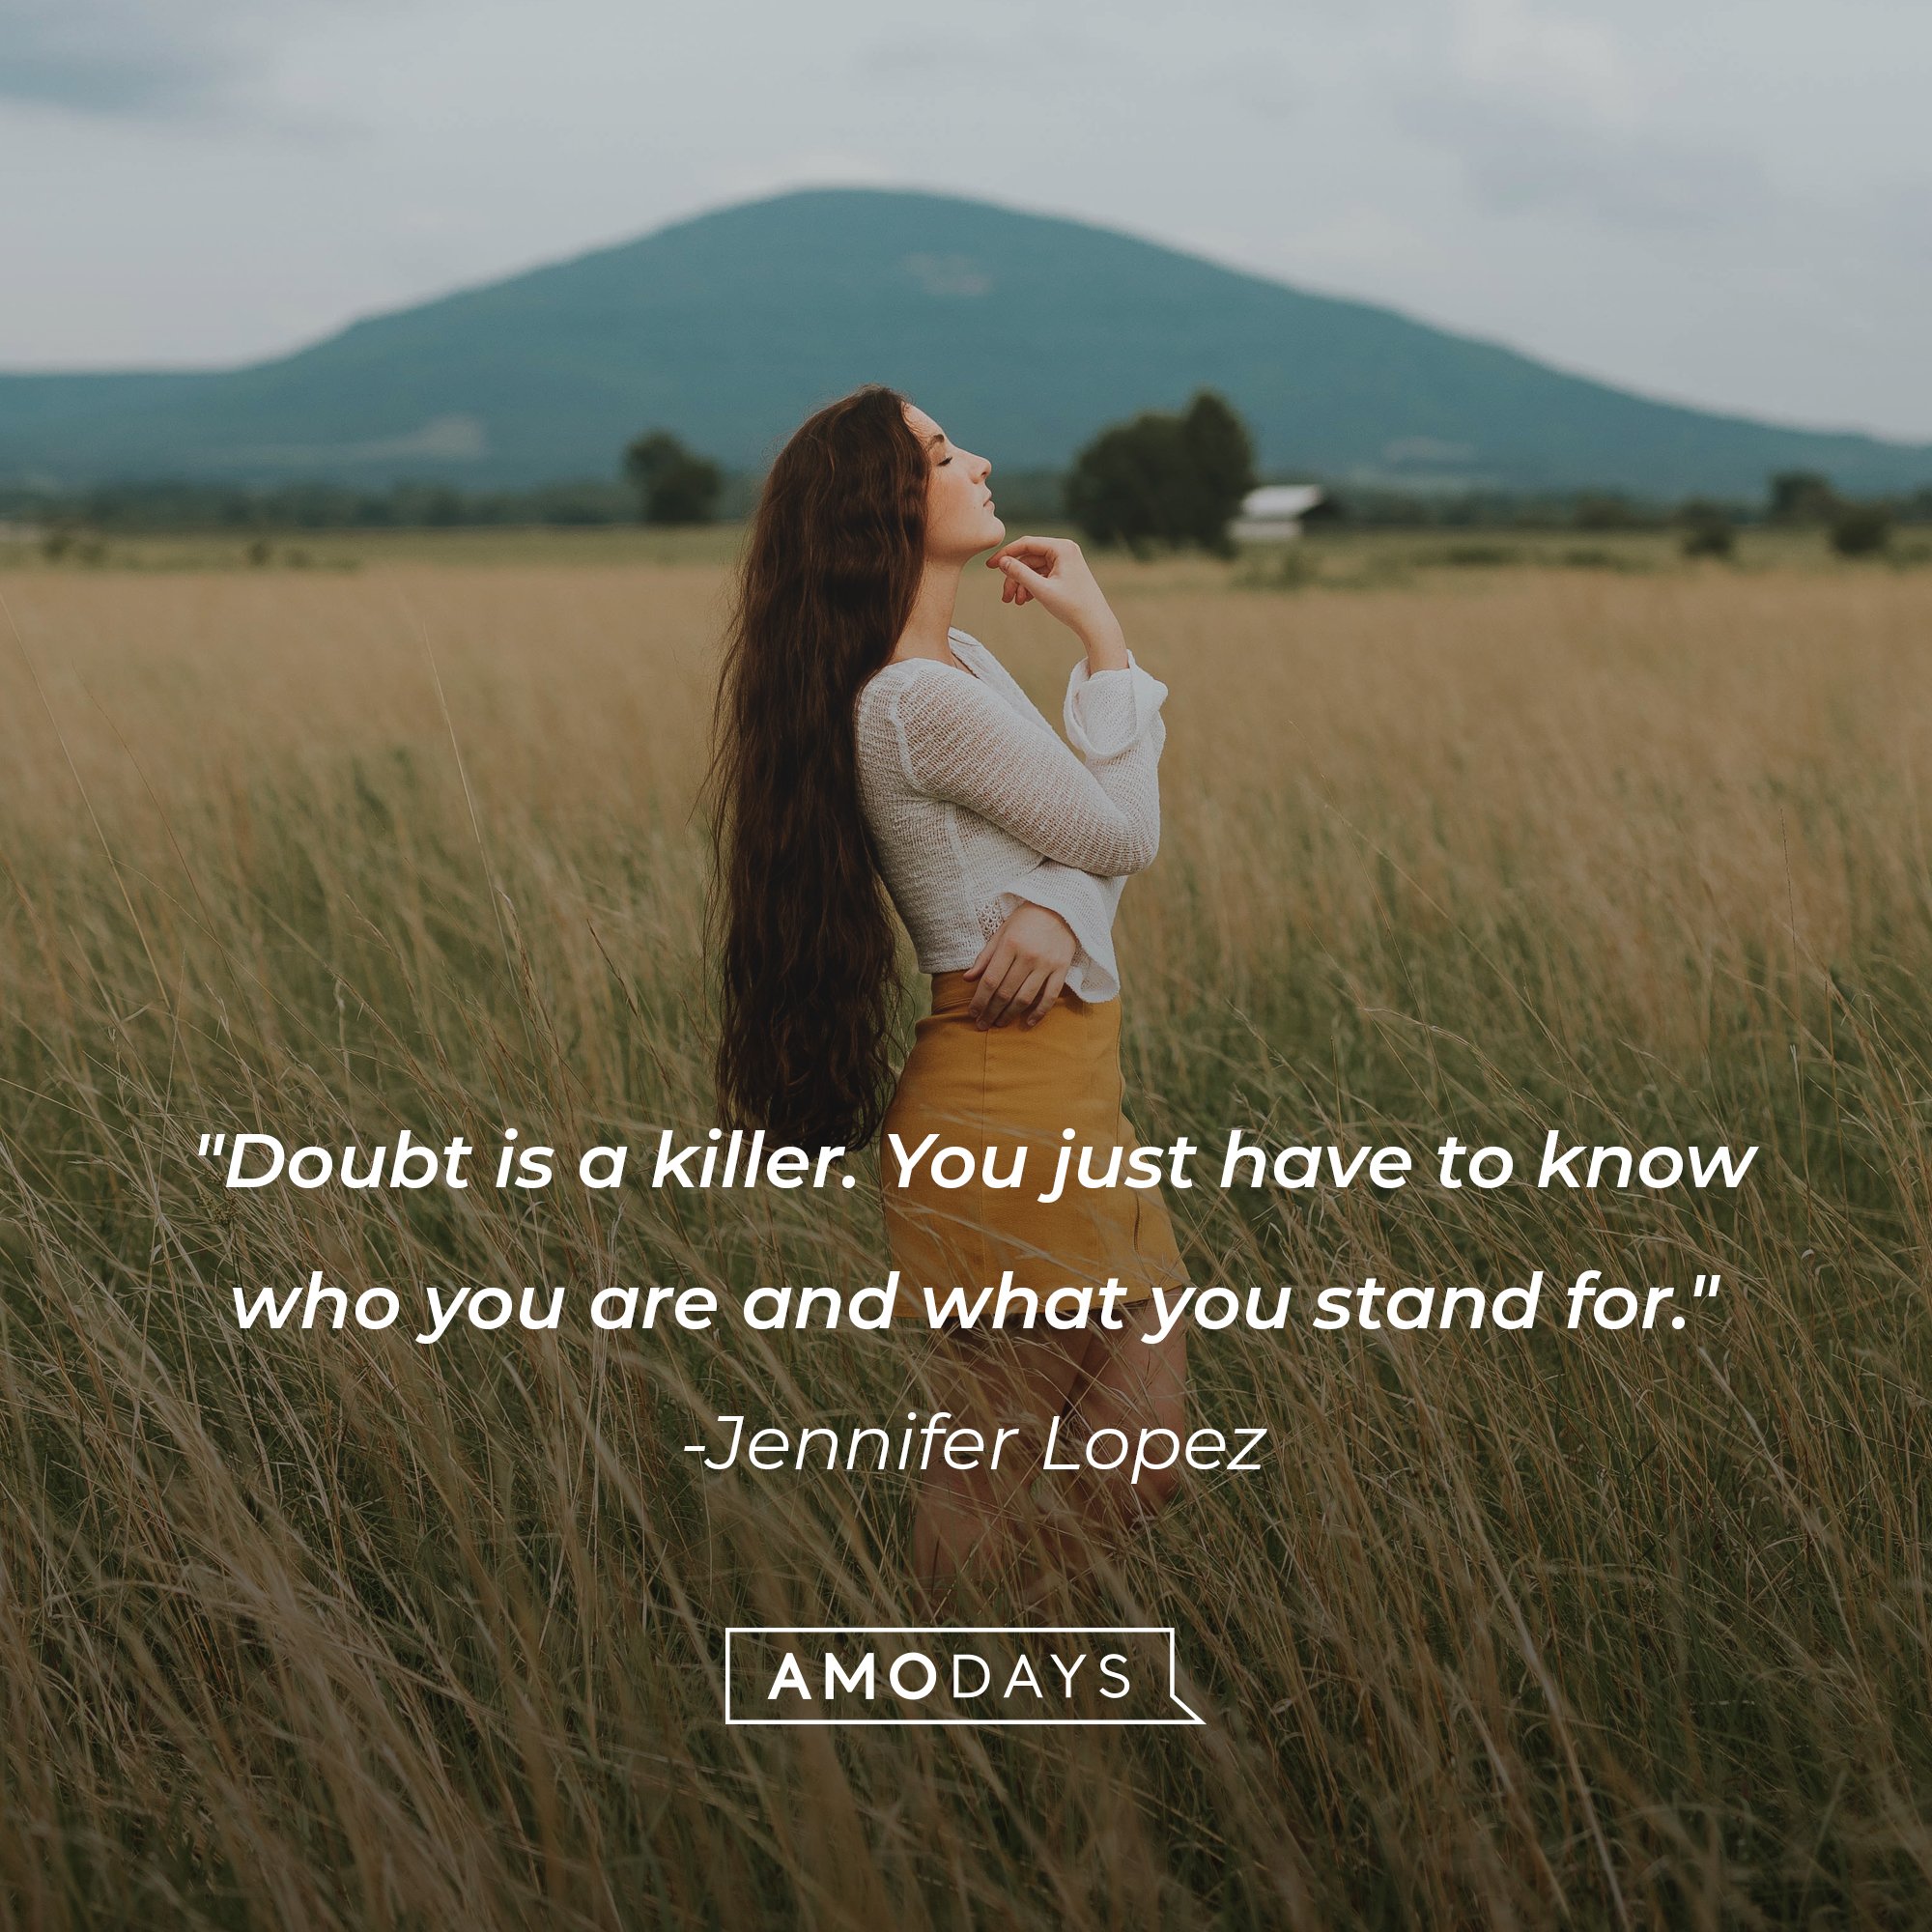  Jennifer Lopez’s quote: "Doubt is a killer. You just have to know who you are and what you stand for." | Image: AmoDays